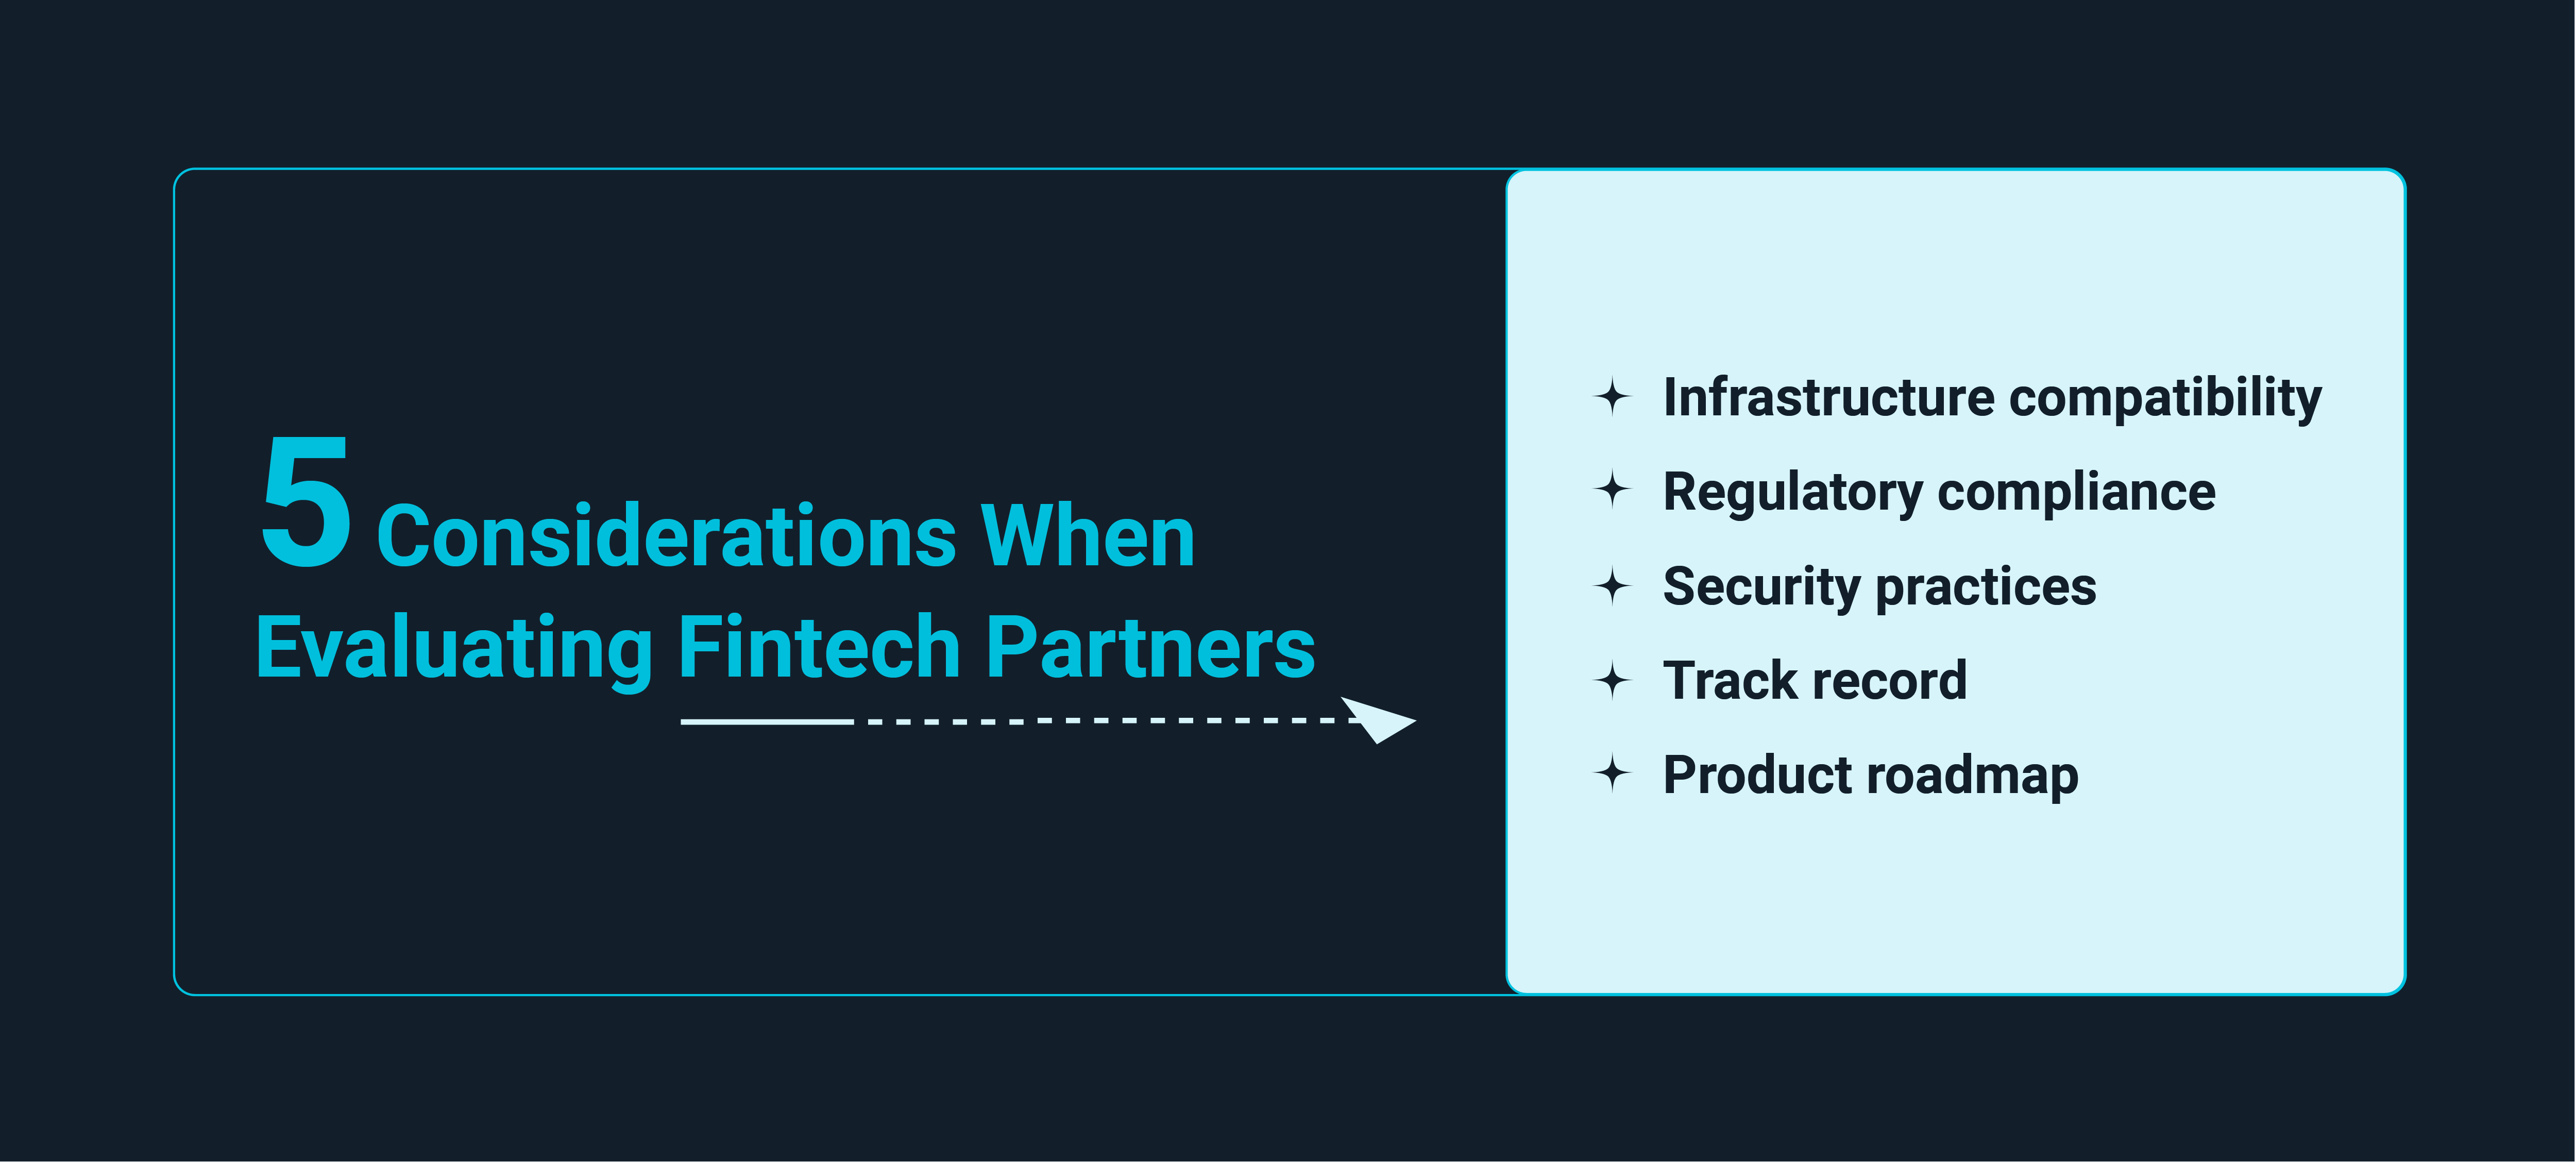 5 Considerations When Evaluating Fintech Partners